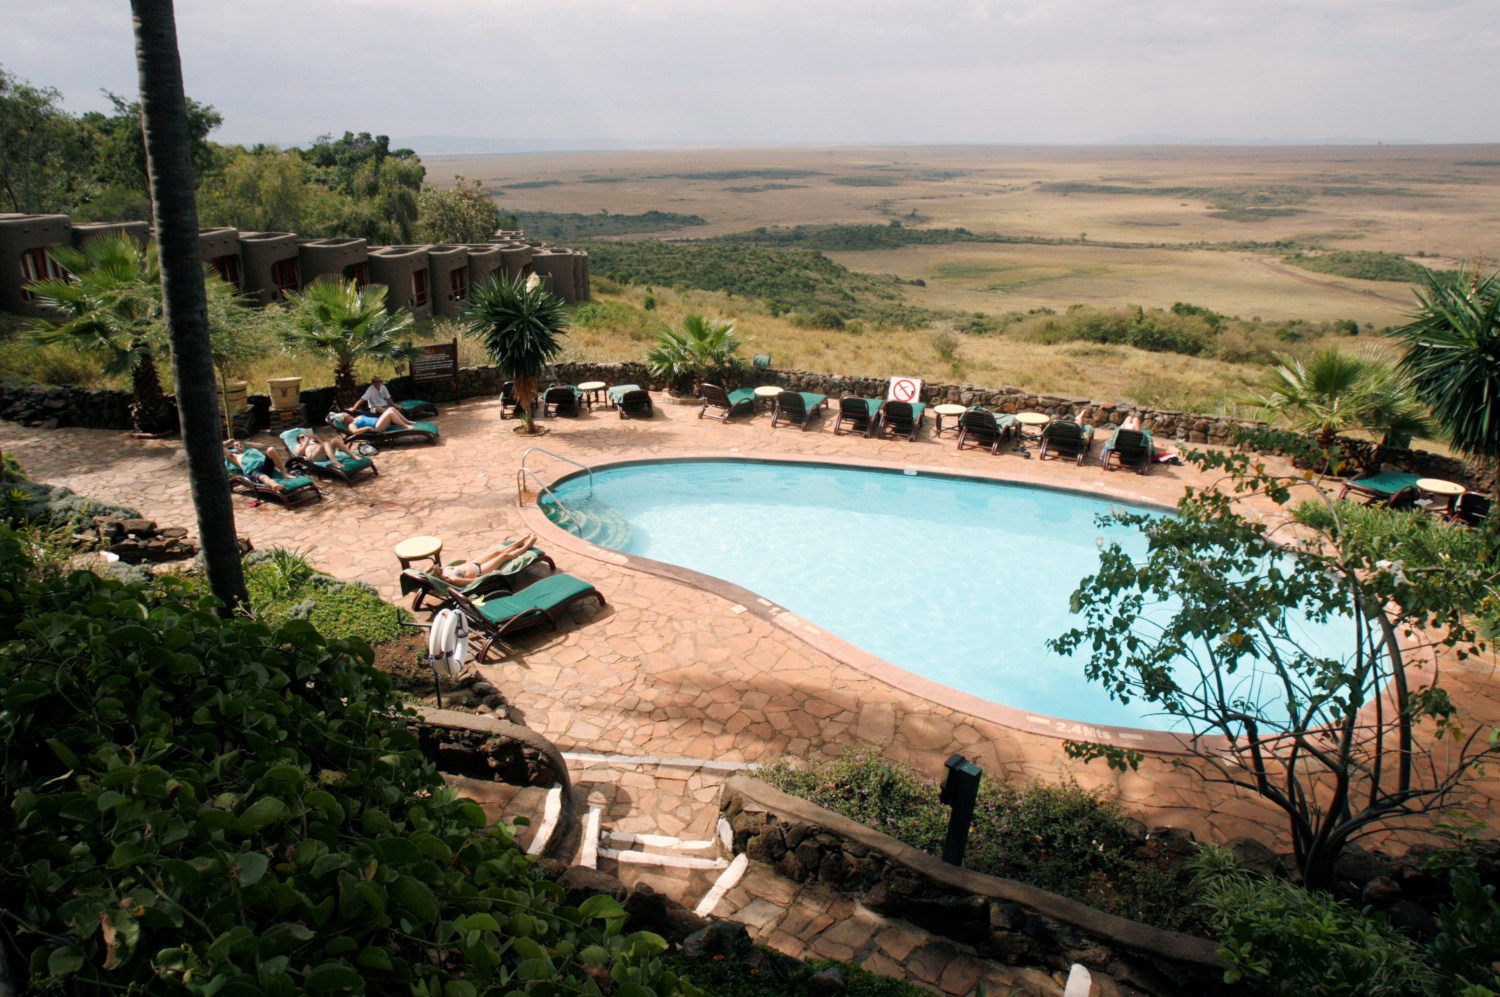 Tourists are seen by the poolside of the Mara Serena Safari Lodge, within the Masai Mara game reserve, southwest of Nairobi, Kenya, July 28, 2009. Picture taken July 28, 2009. REUTERS/Thomas Mukoya     TPX IMAGES OF THE DAY - RC1B60ECDBC0